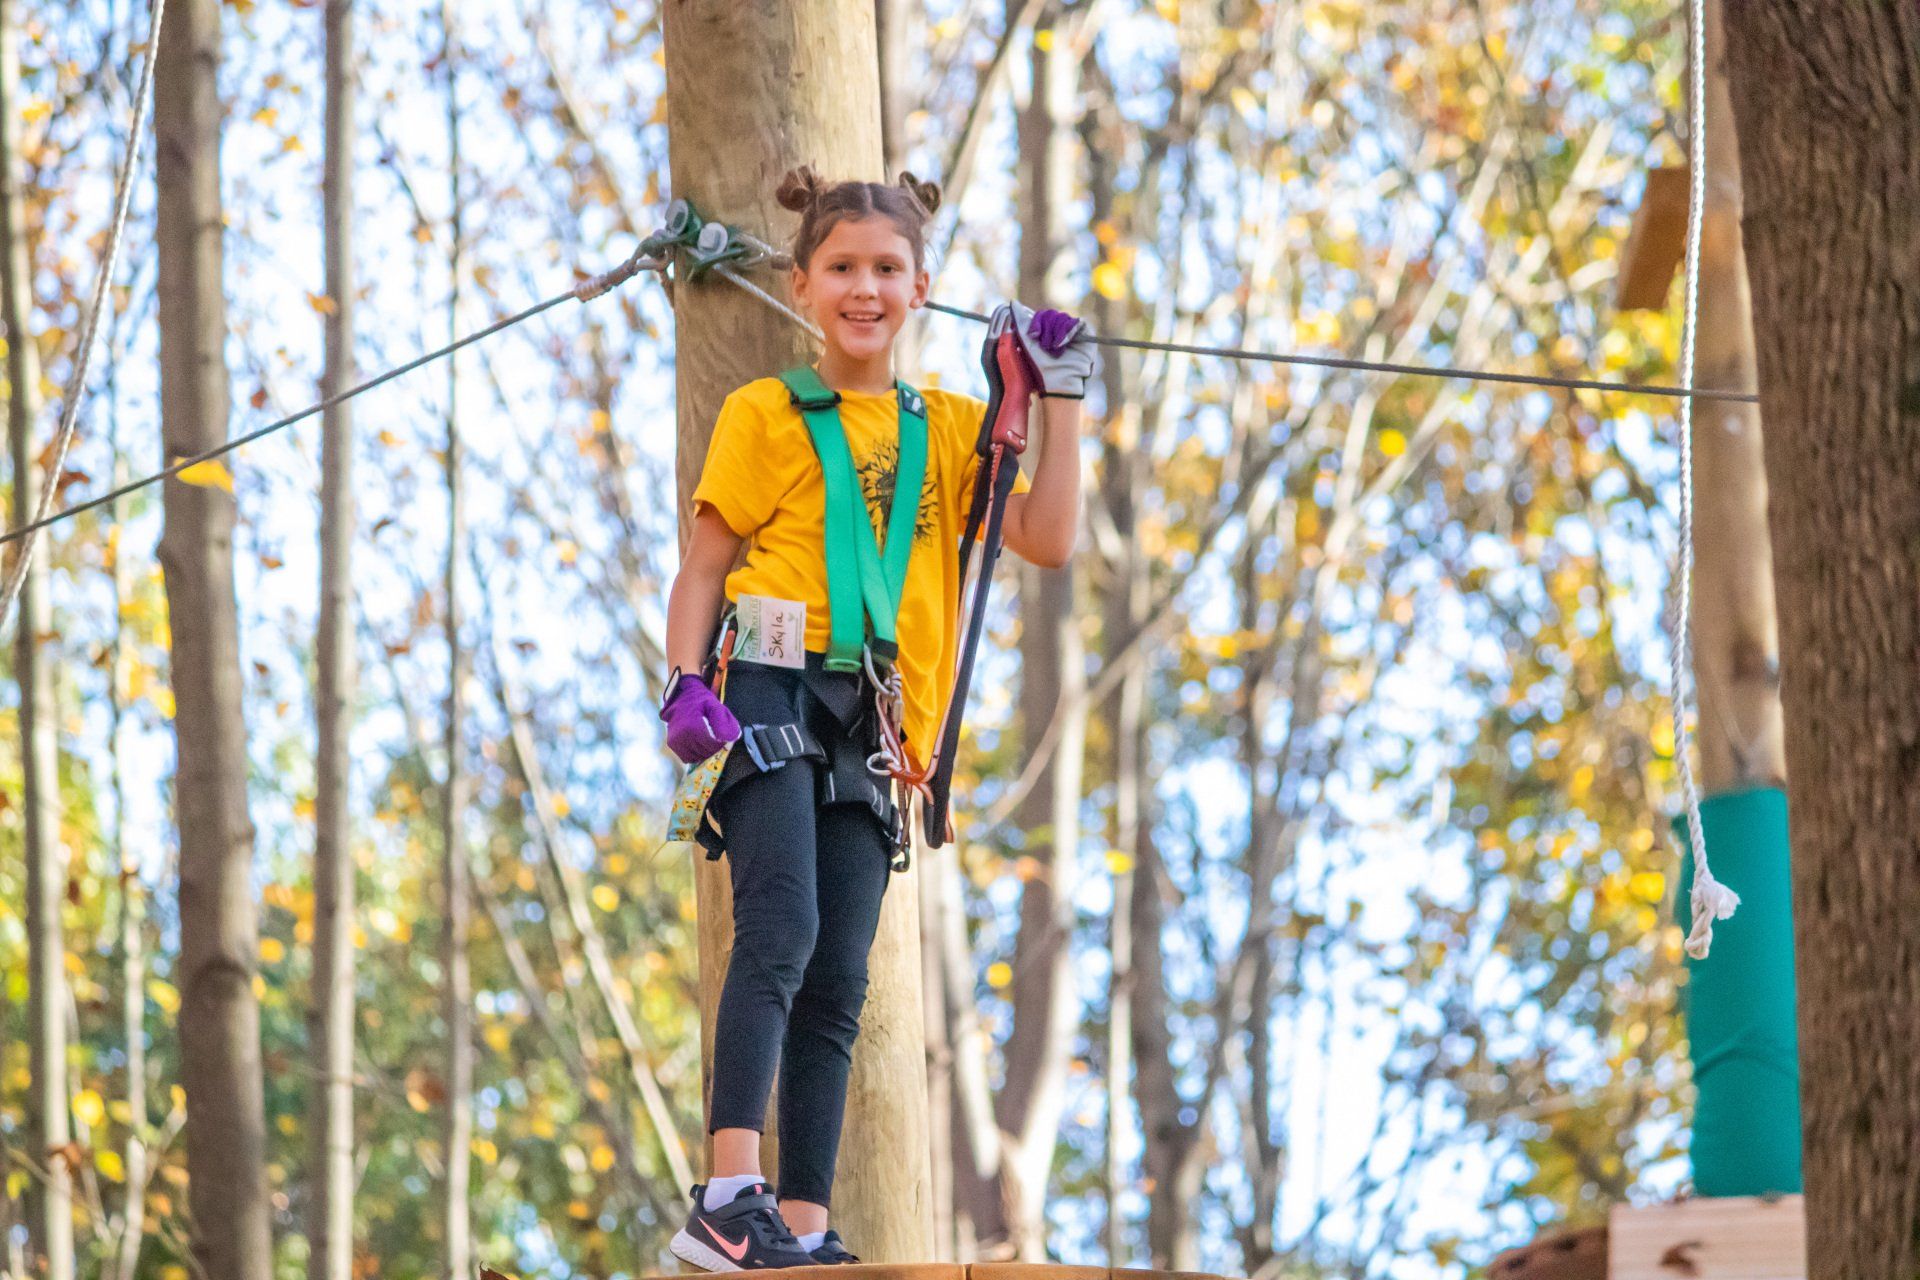 Camper climbing obstacle at Frederick Camp